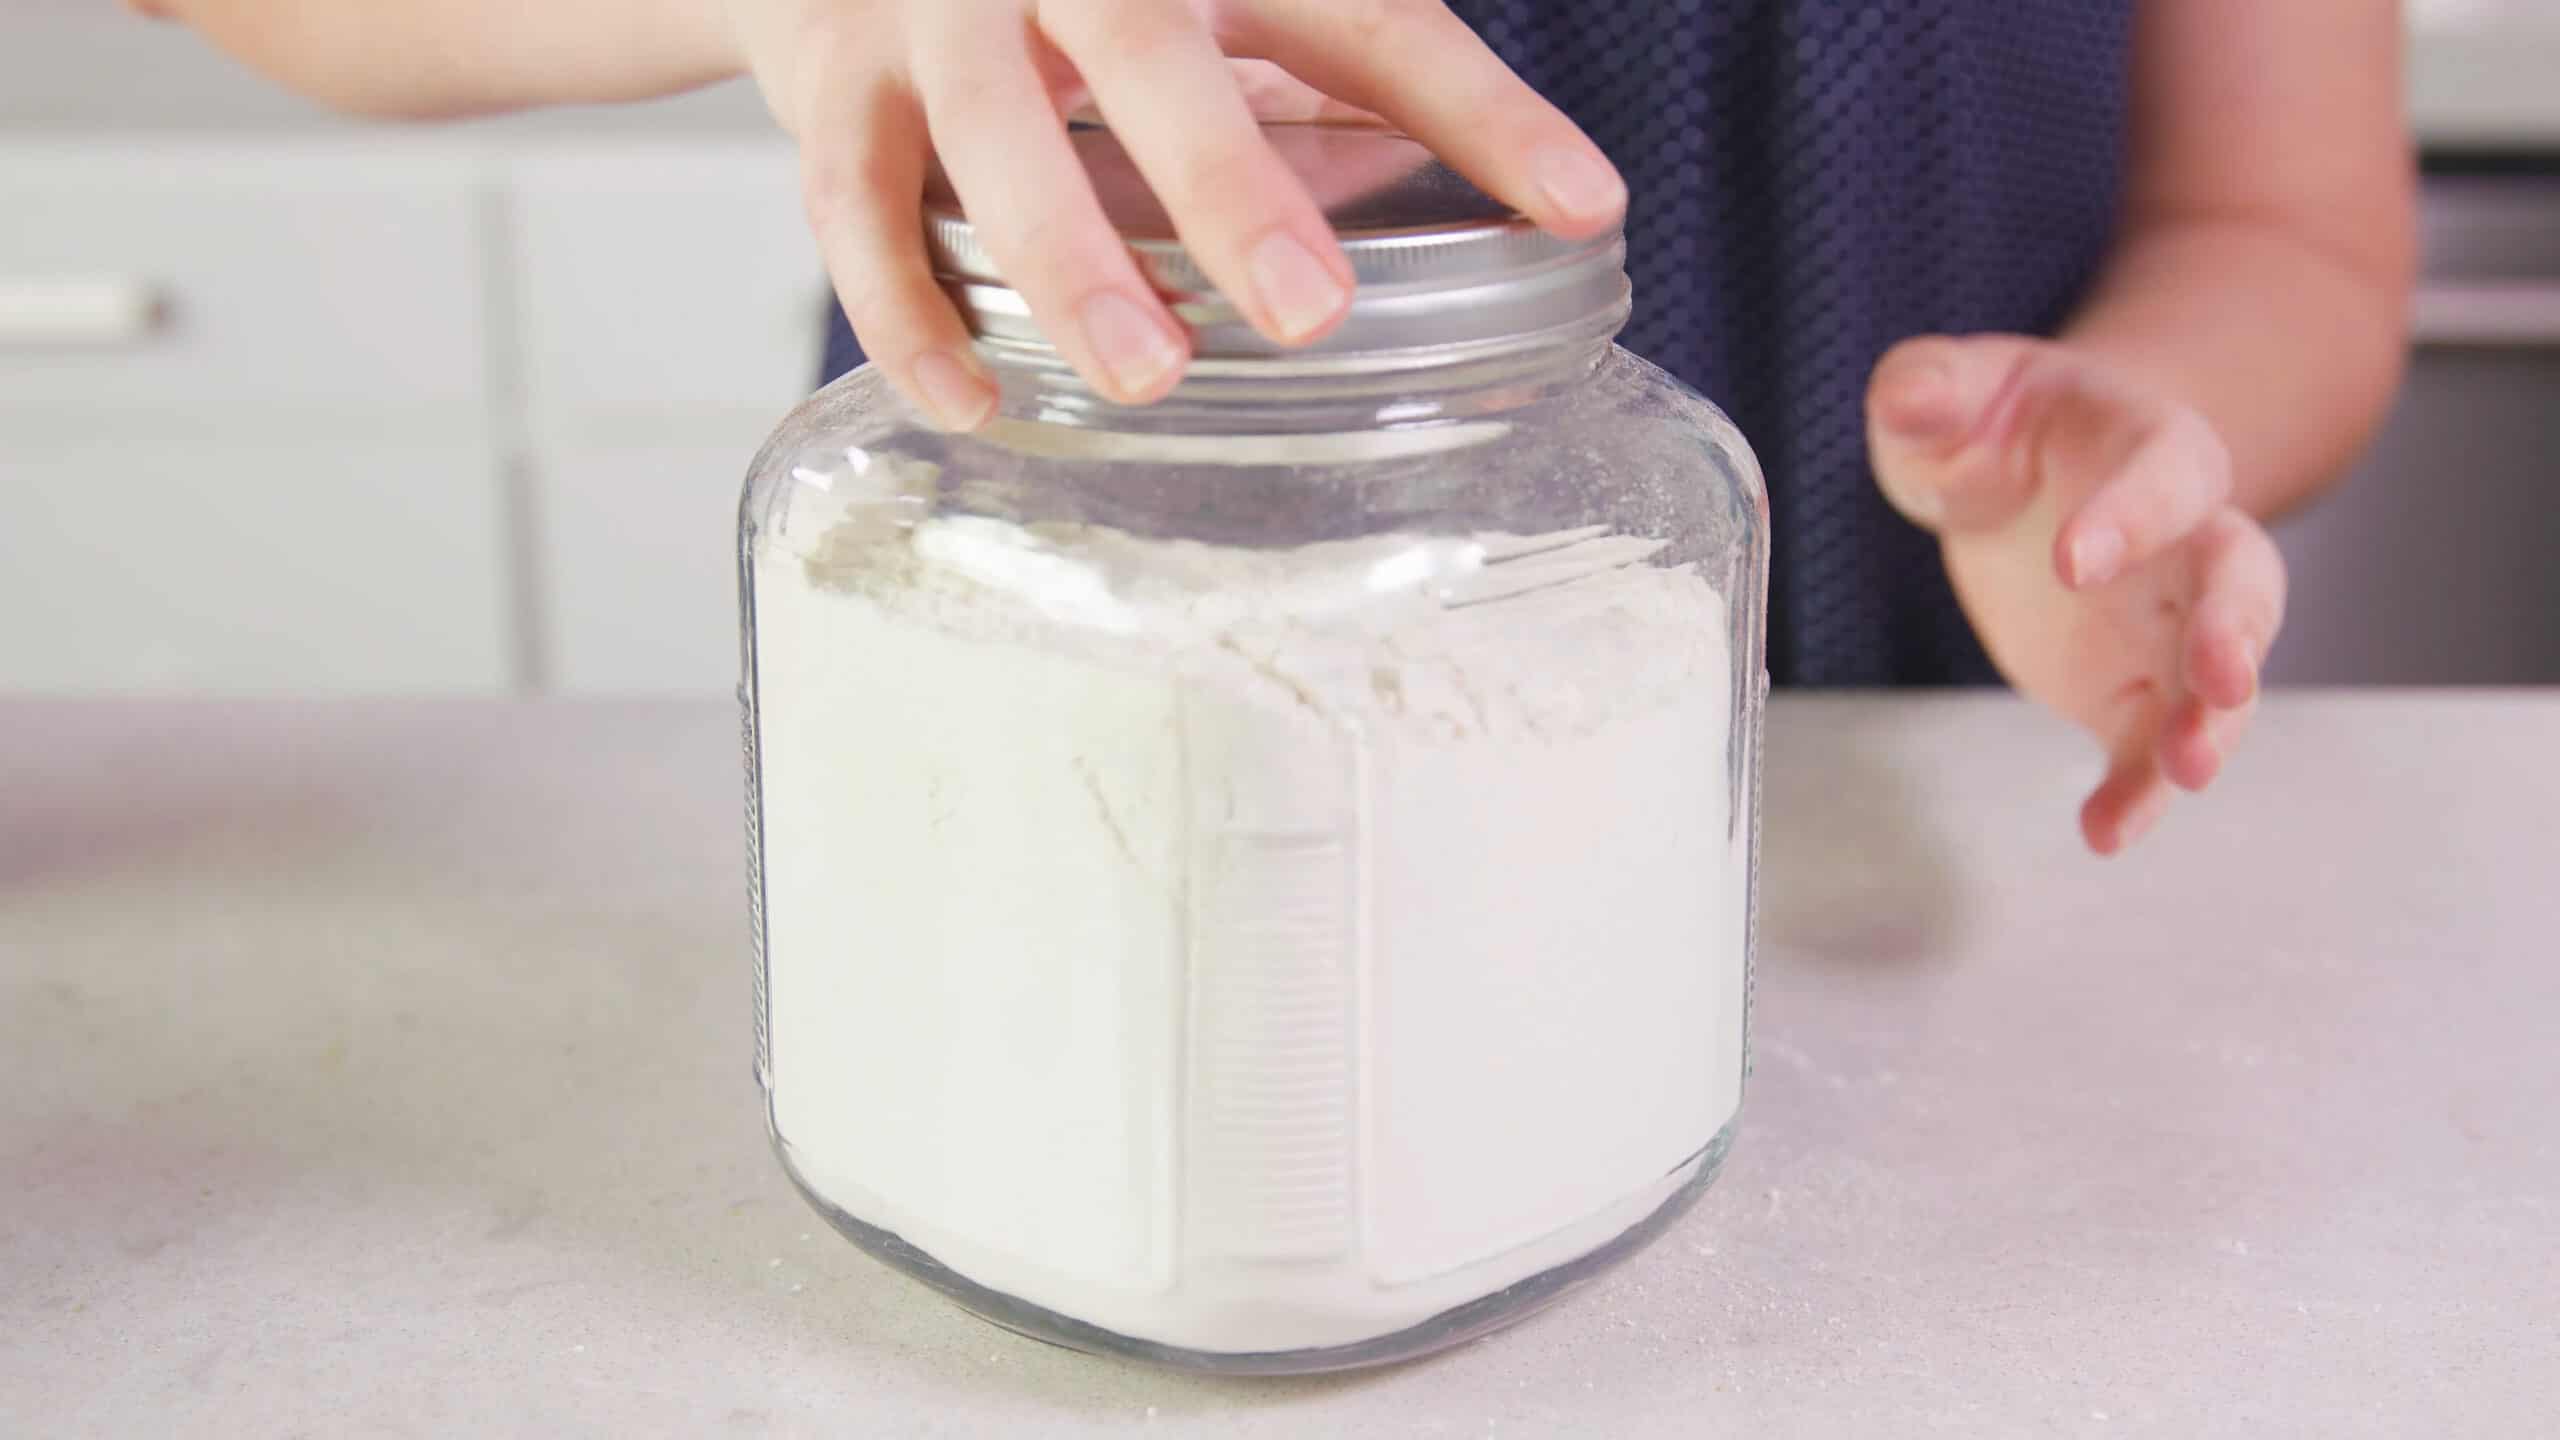 Close-up view of the full glass jar that holds the completed recipe of dry ingredients for the pancake mix and a silver lid twisted on top.